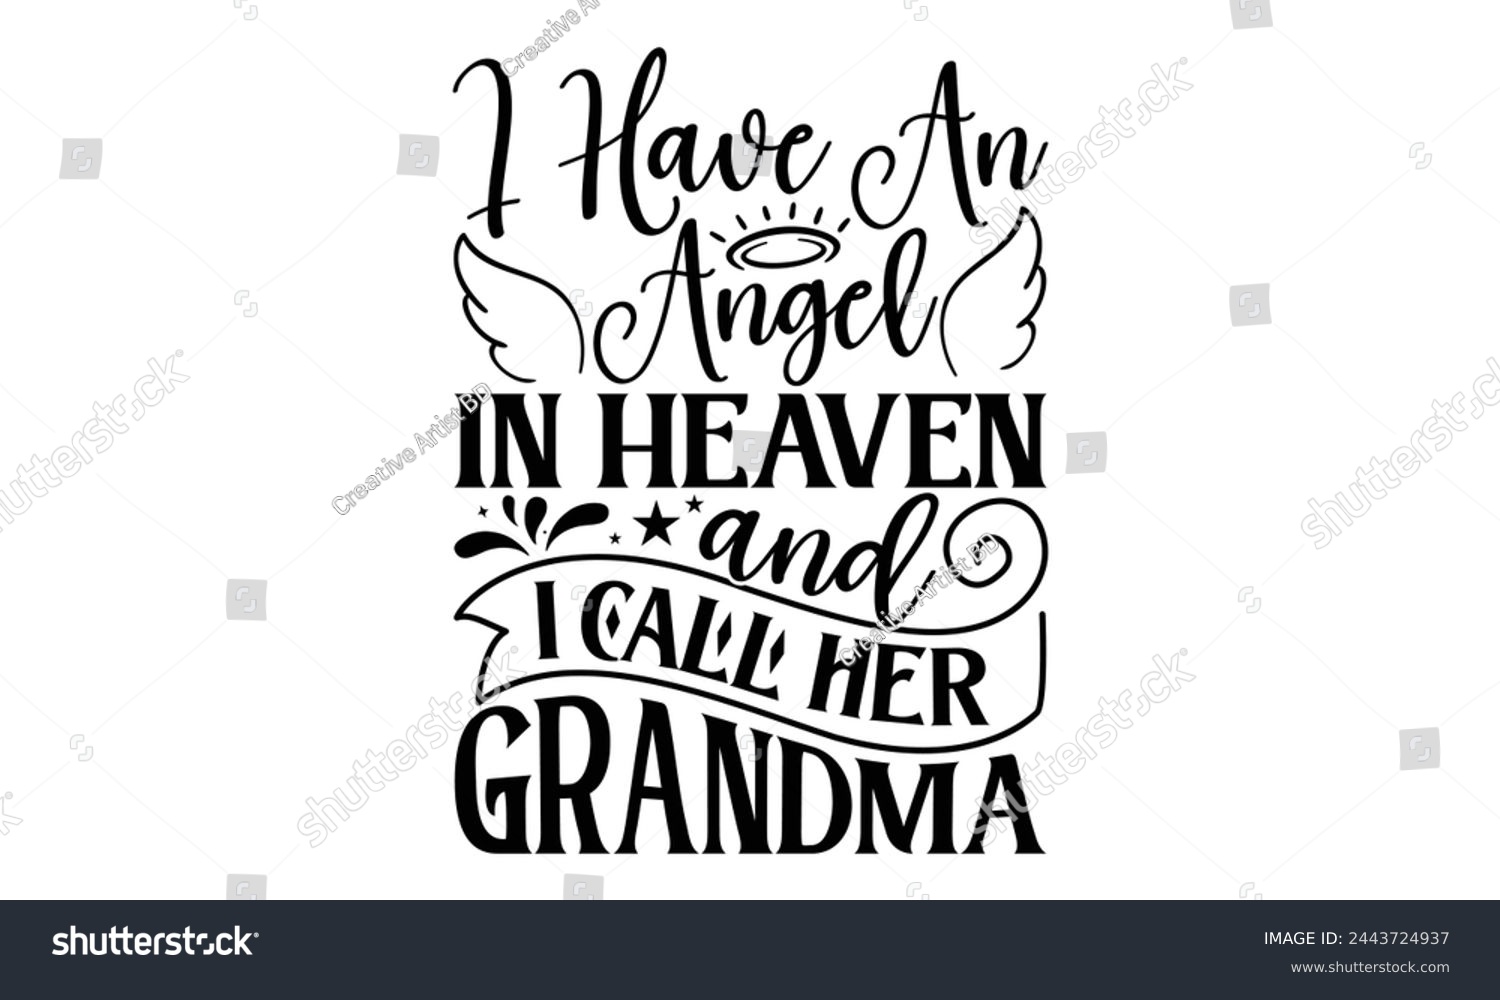 SVG of I Have An Angel In Heaven And I Call Her Grandma - Memorial T shirt Design, Handmade calligraphy vector illustration, Typography Vector for poster, banner, flyer and mug. svg